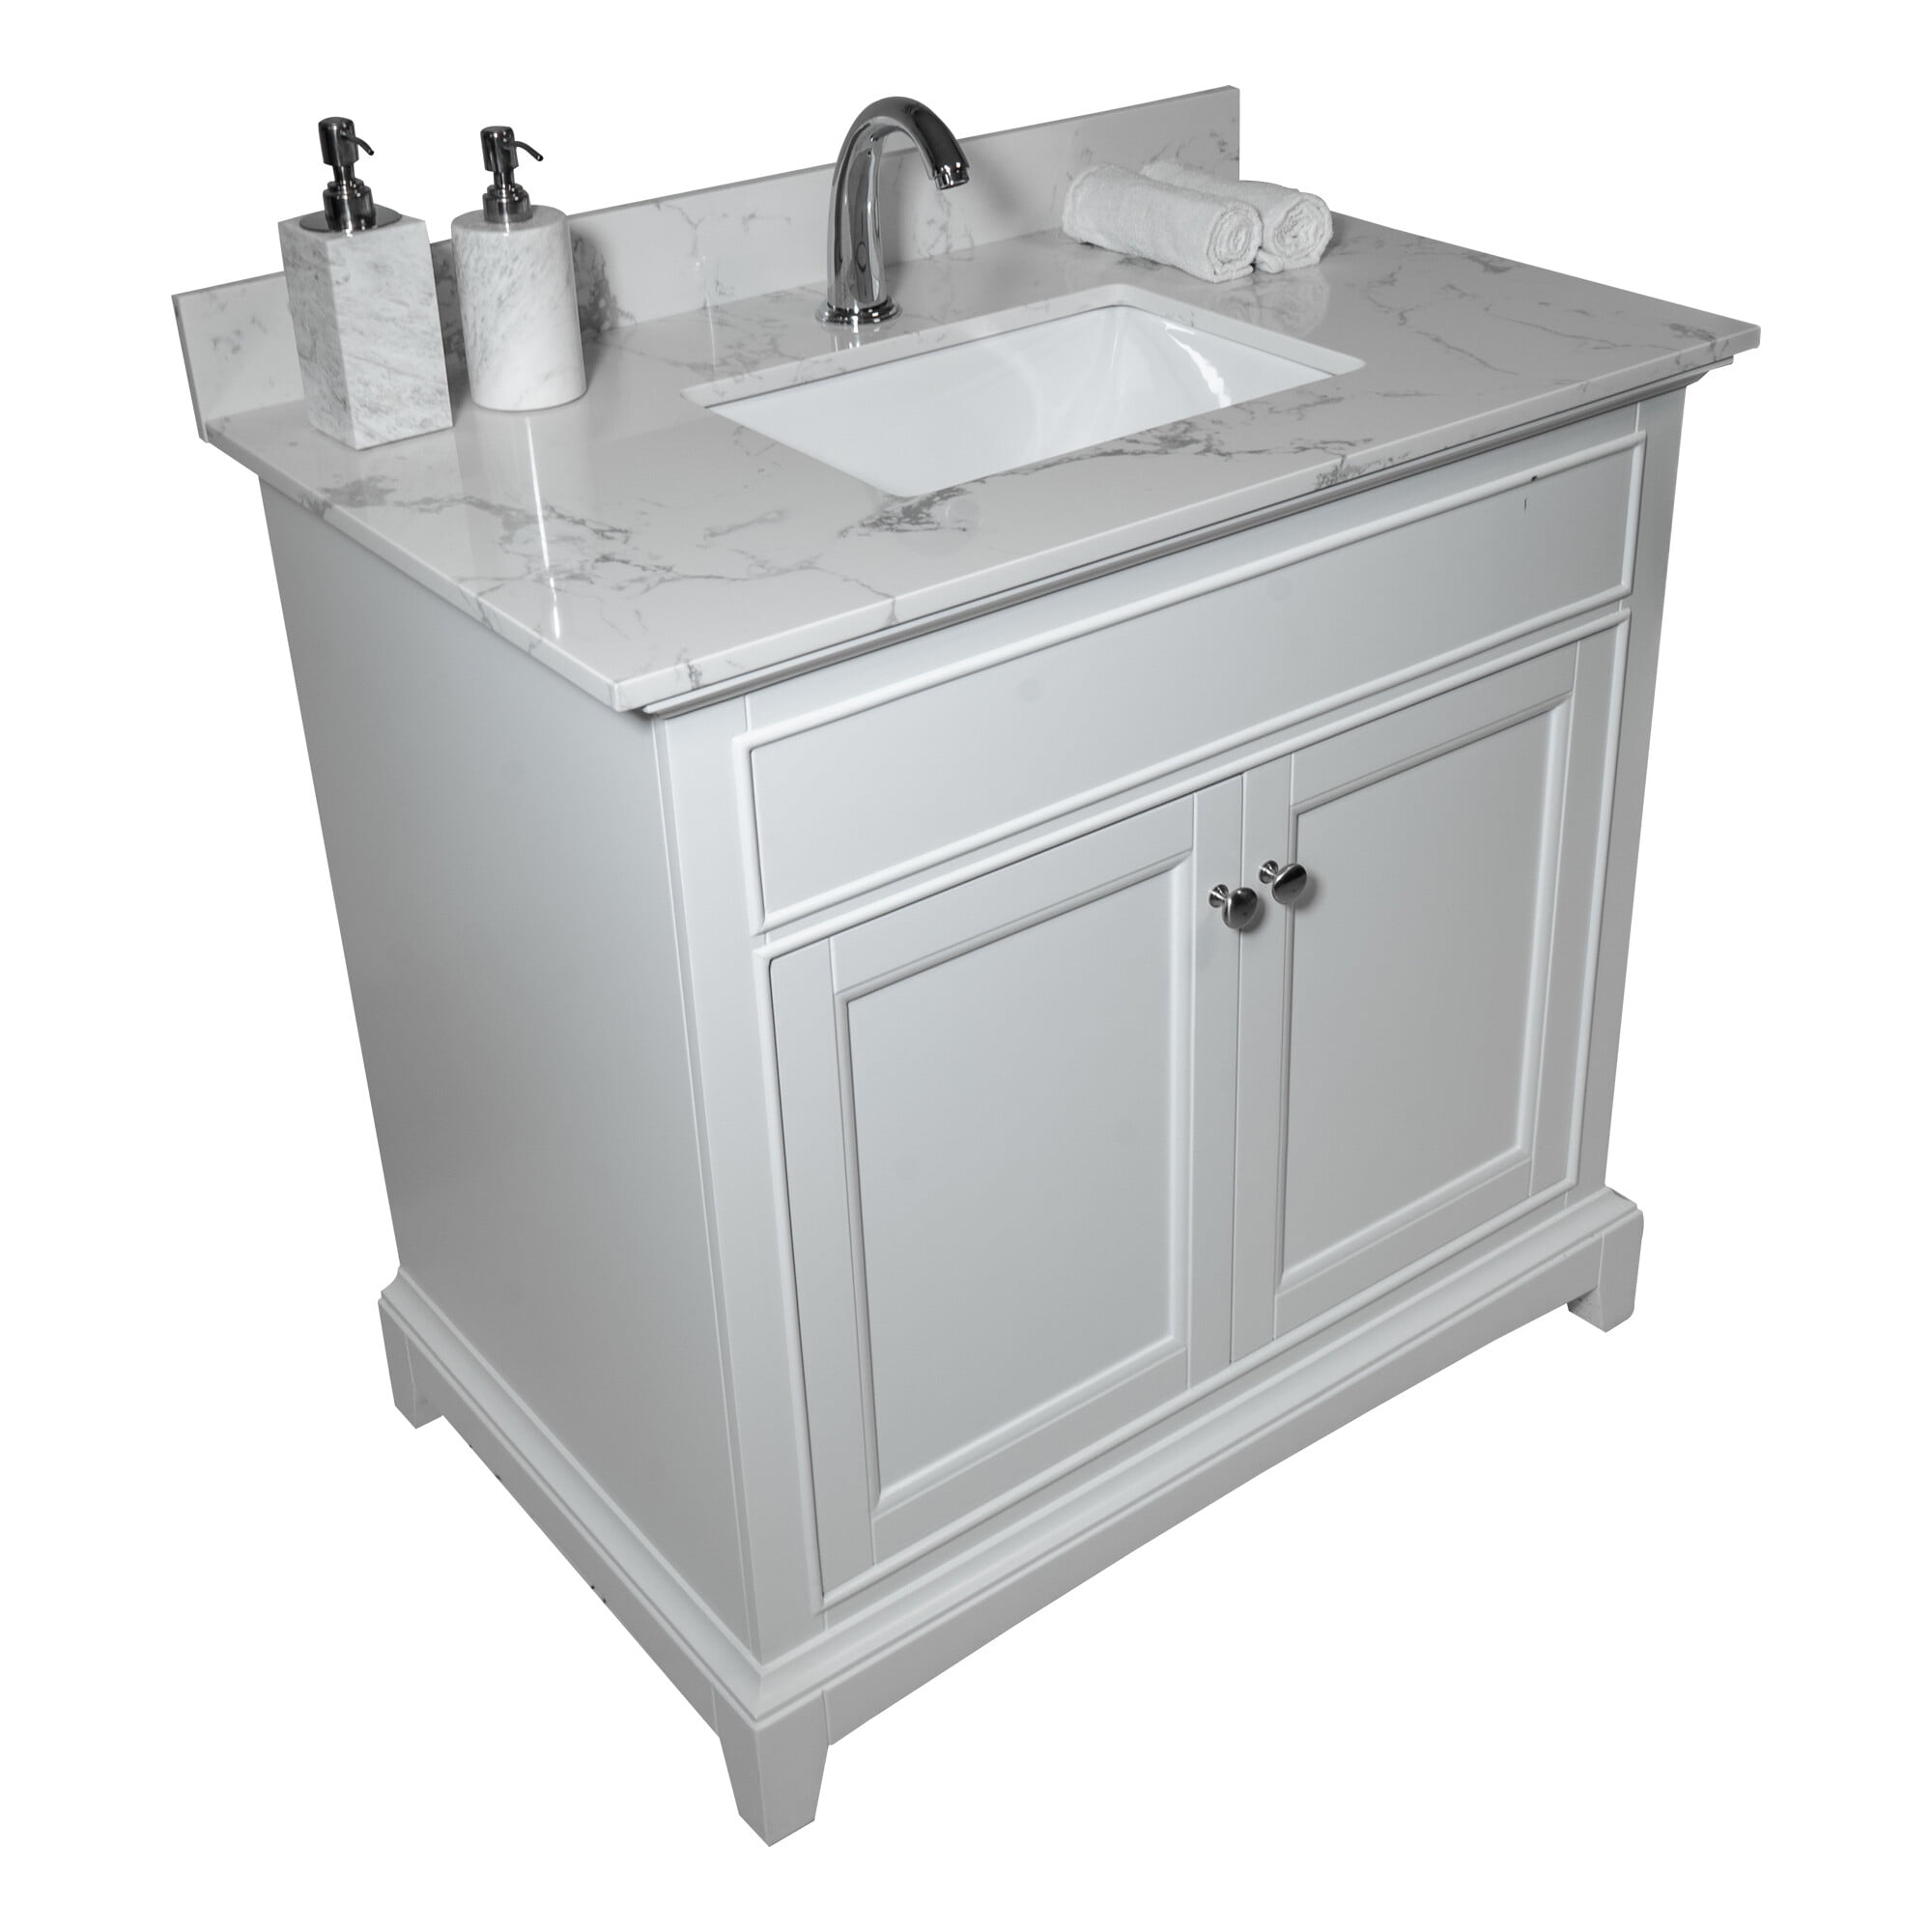 OVERDRIVE 31 inch Bathroom Stone Vanity Top White Marble Color with 